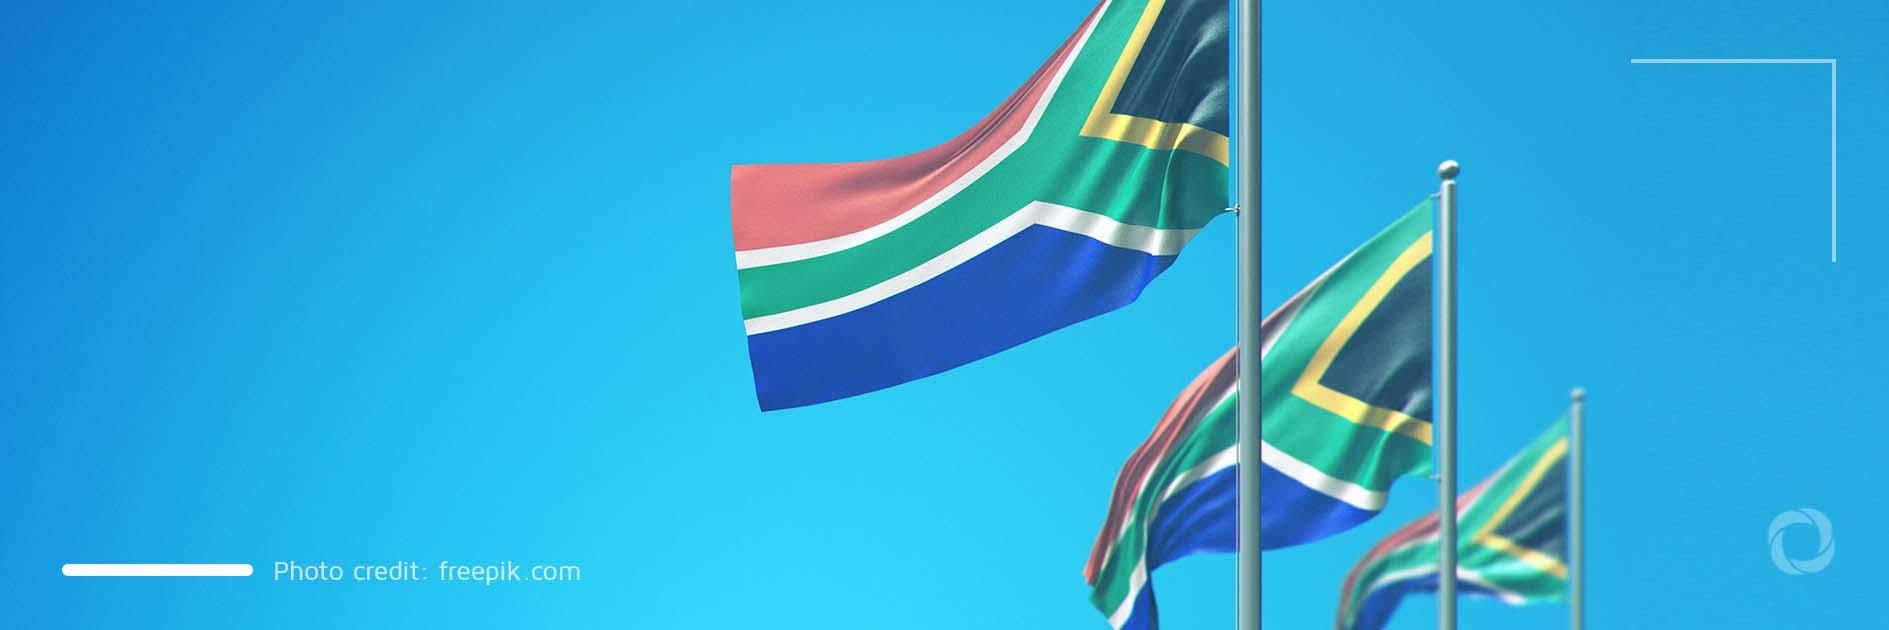 South Africa GDP estimated to dip slowing down progress on poverty reduction